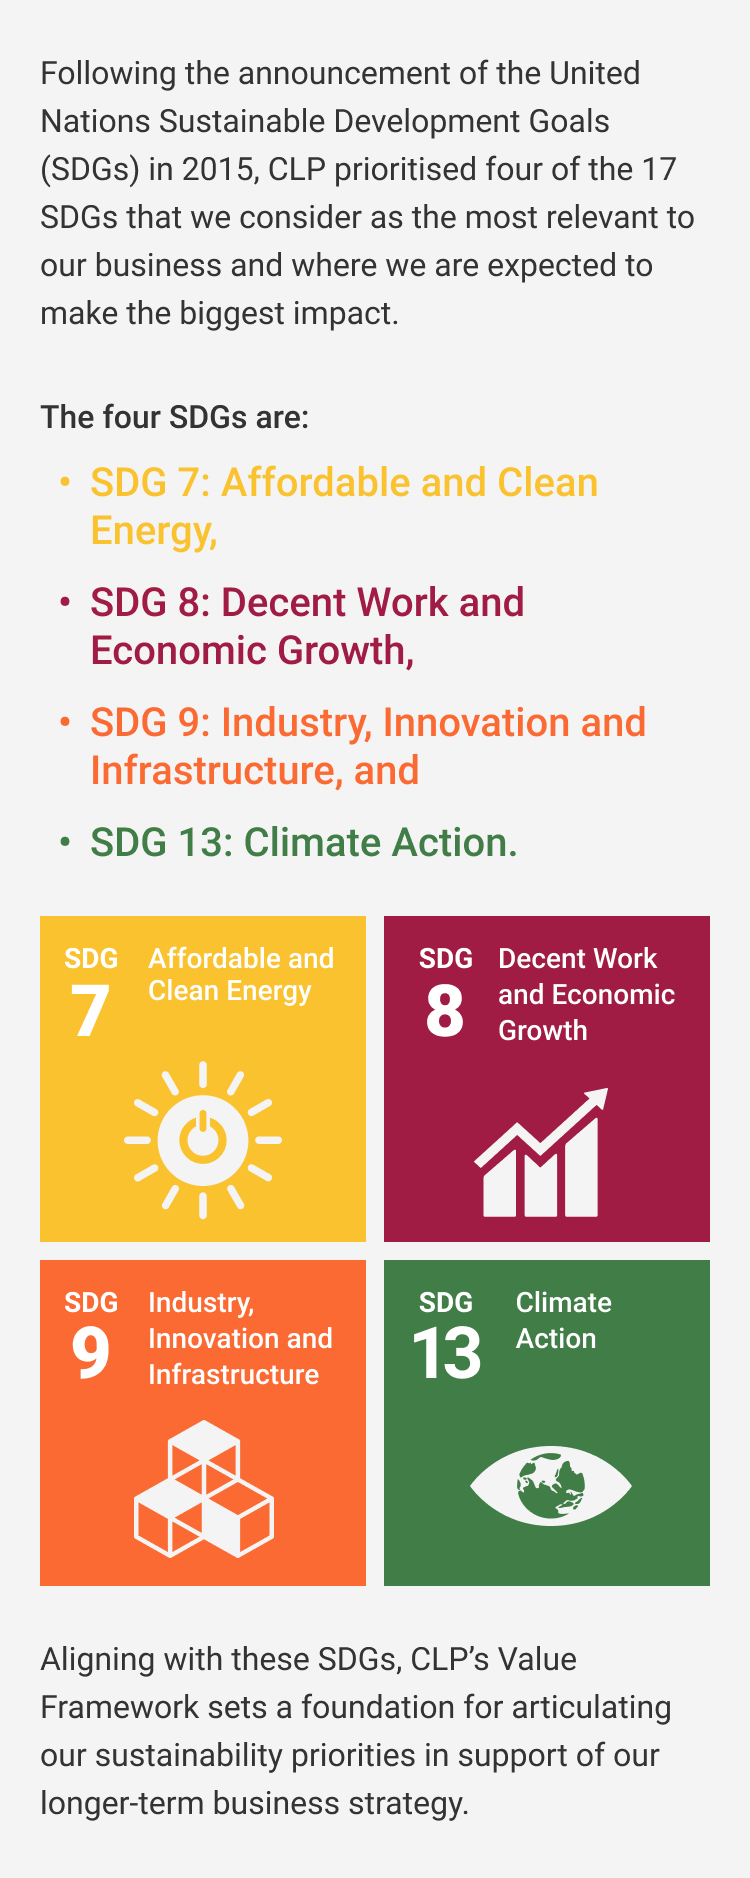 CLP prioritised 4 SDGs most relevant to our business